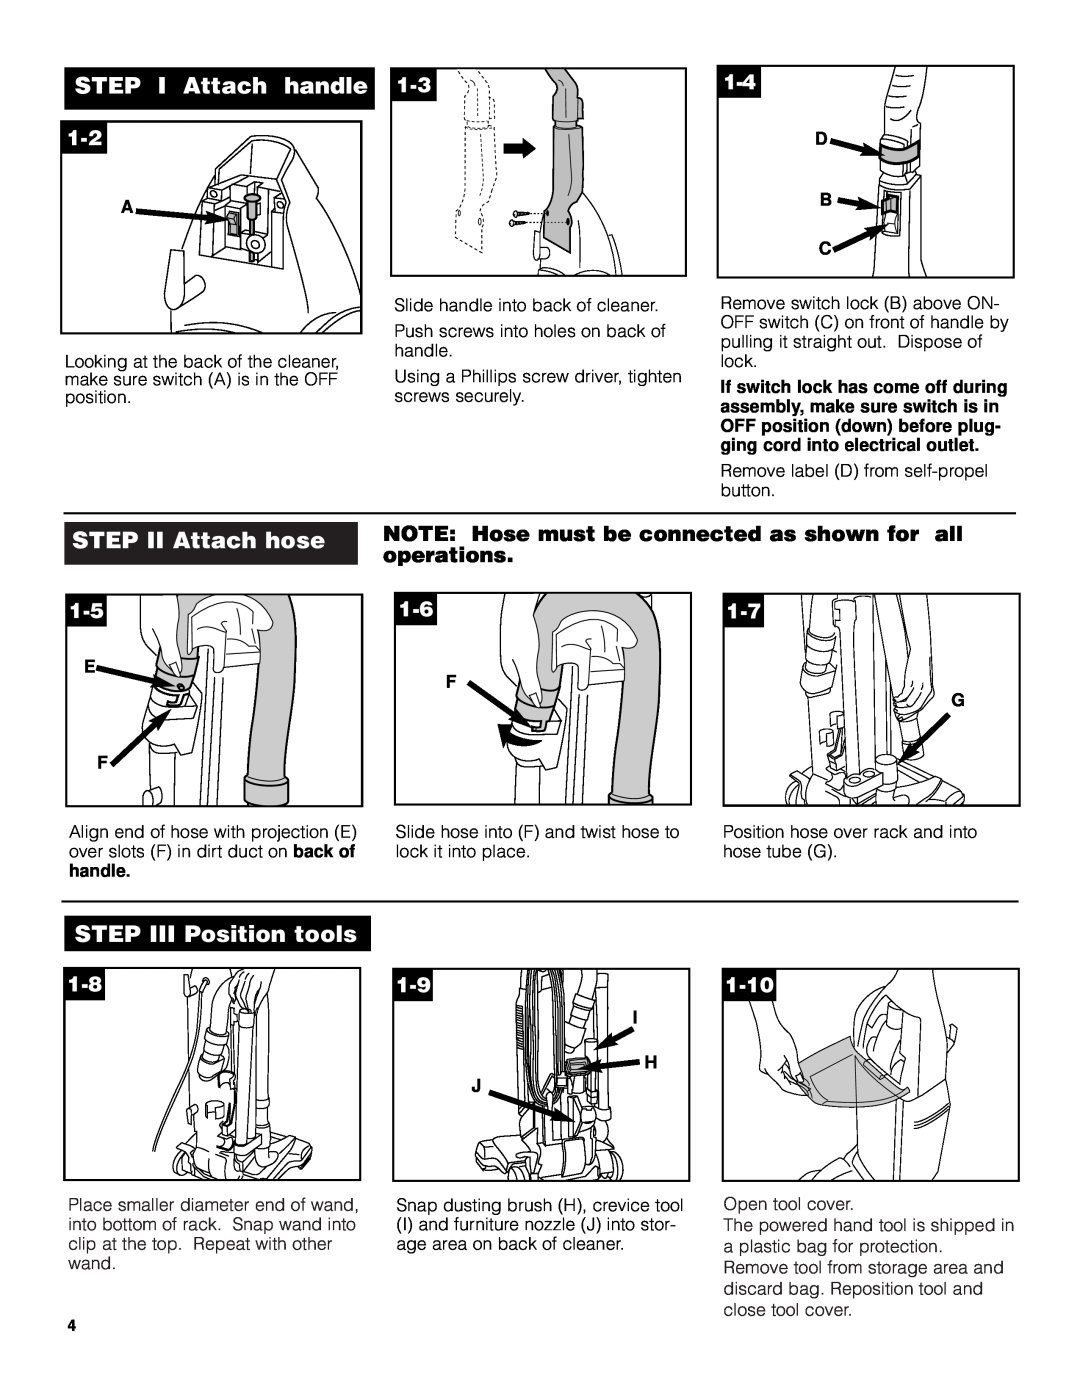 Hoover UH70600 NOTE Hose must be connected as shown for all, operations, 1-10, STEP I Attach handle, STEP II Attach hose 